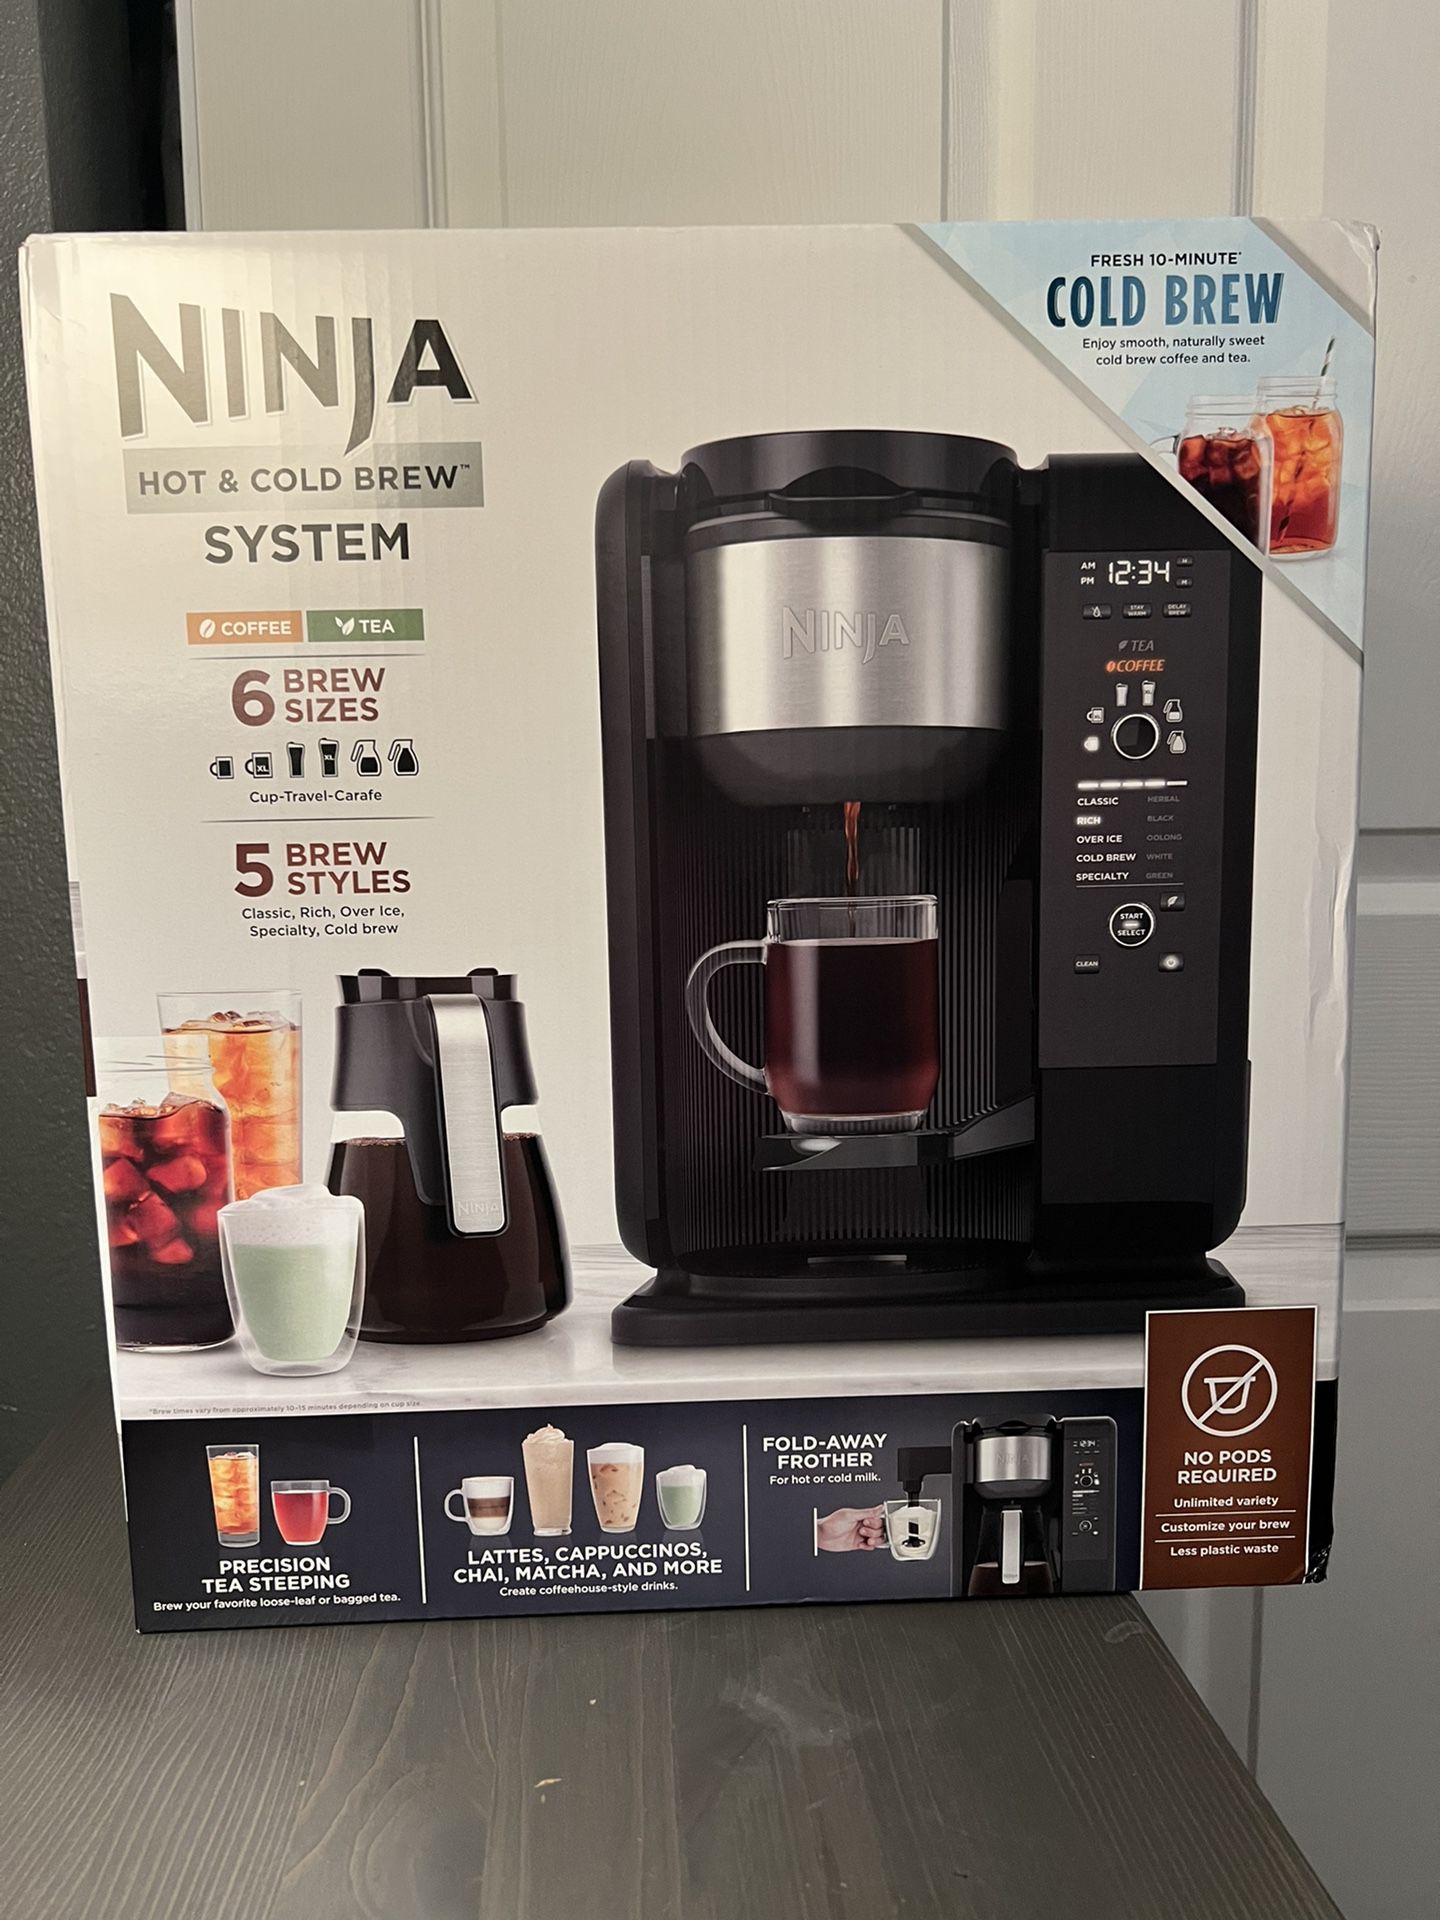 Ninja Coffee Maker With Frother And Can Make Single Cup With Pods As Well!  for Sale in Victorville, CA - OfferUp